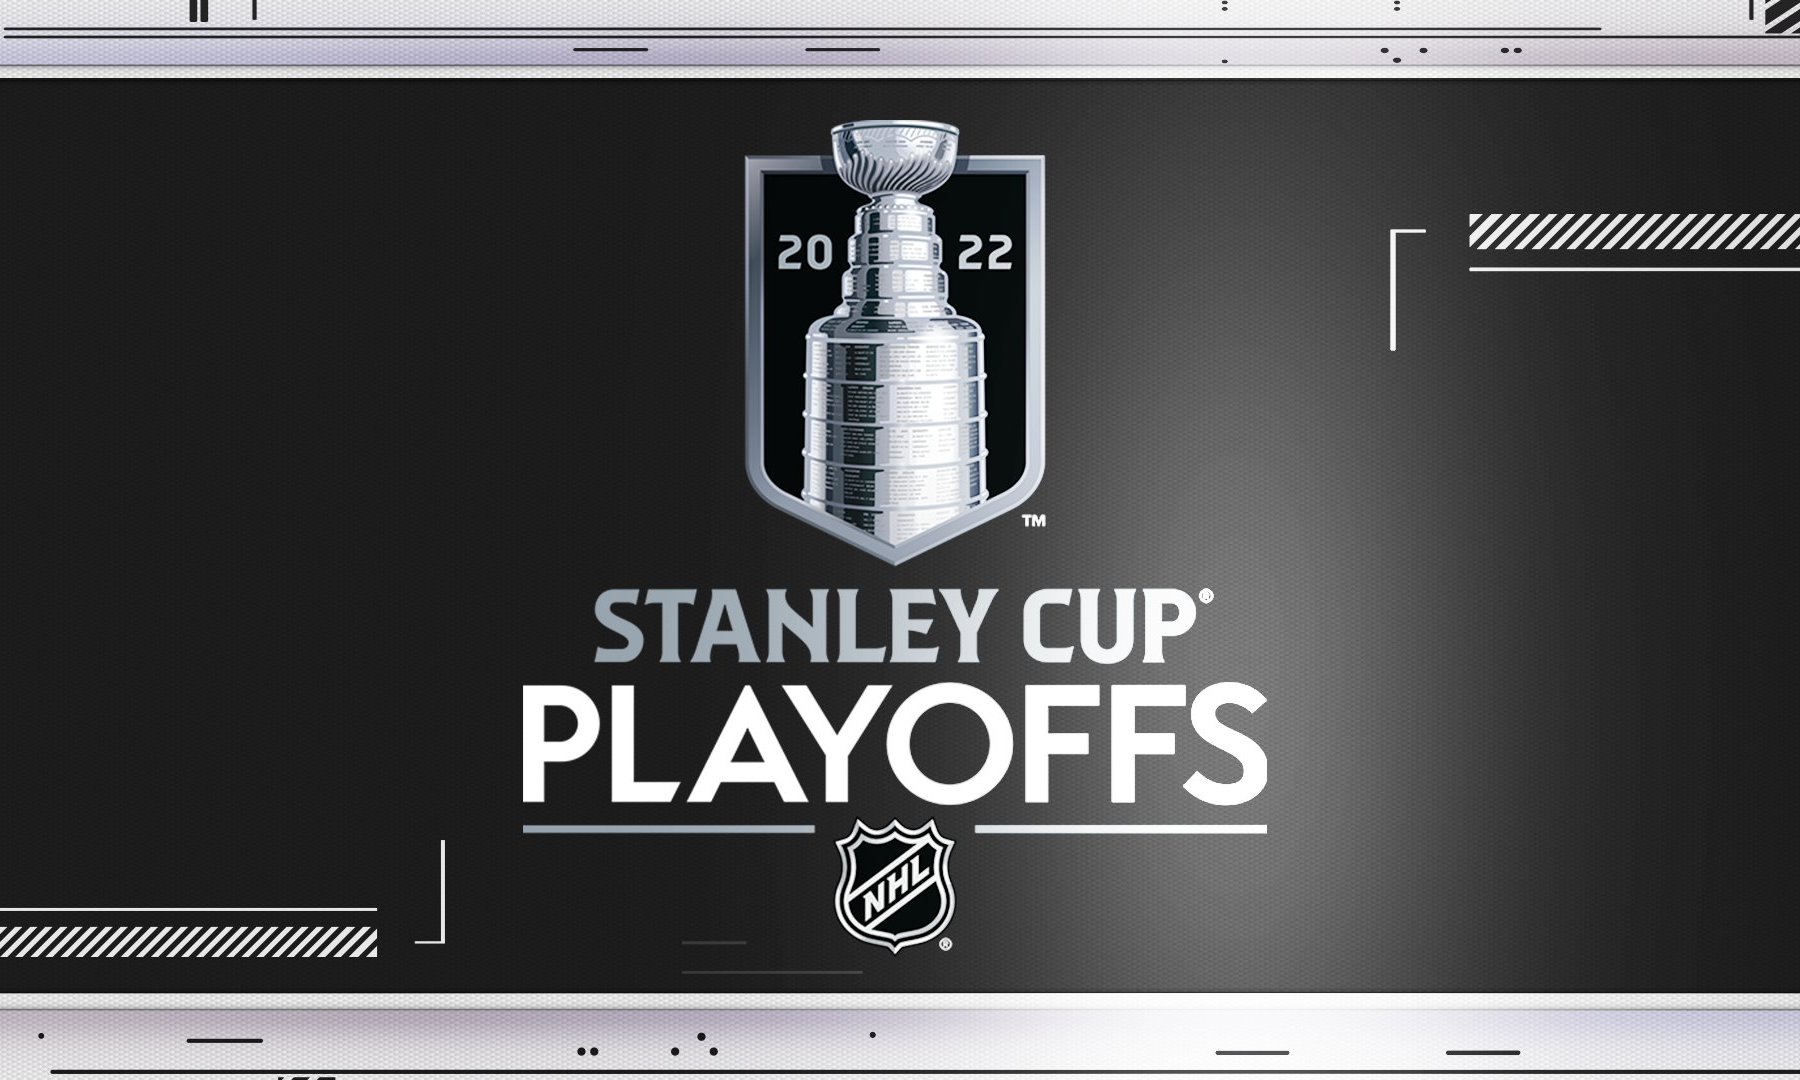 On the Ice Again After Nearly Two Decades, ESPN Continues To Innovate for 2022 Stanley Cup Playoffs